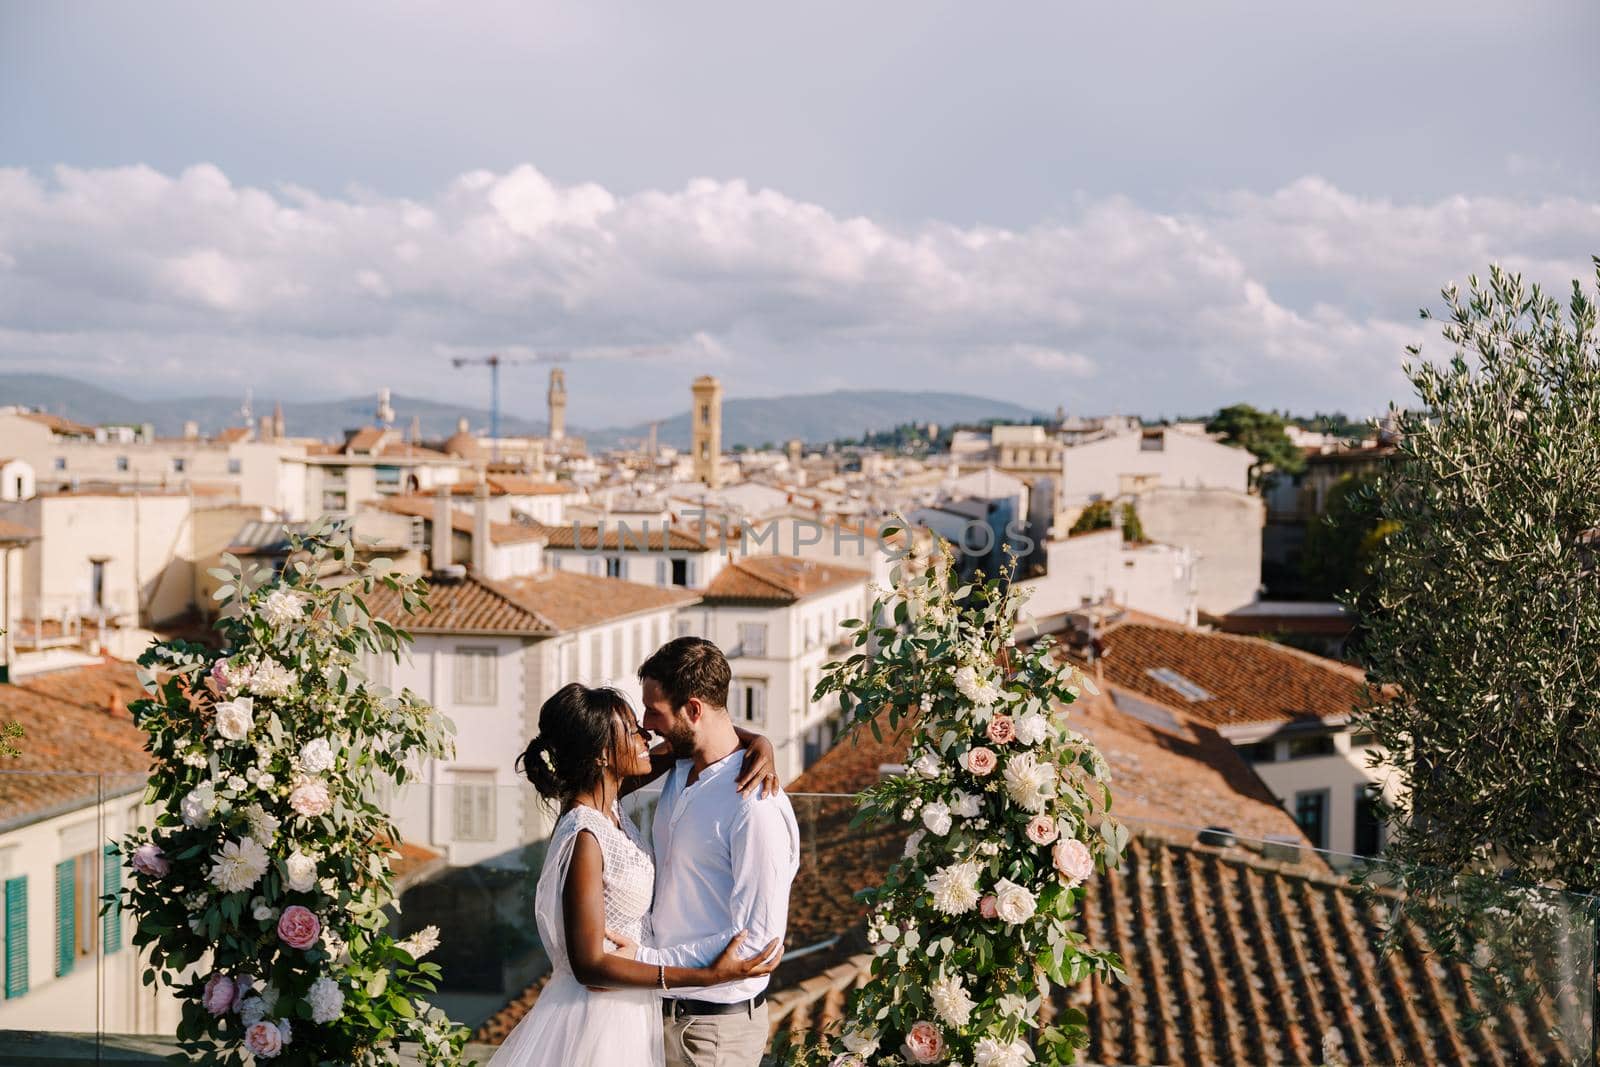 Interracial wedding couple. A wedding ceremony on the roof of the building, with cityscape views of the city and the Cathedral of Santa Maria Del Fiore. Destination fine-art wedding in Florence, Italy by Nadtochiy